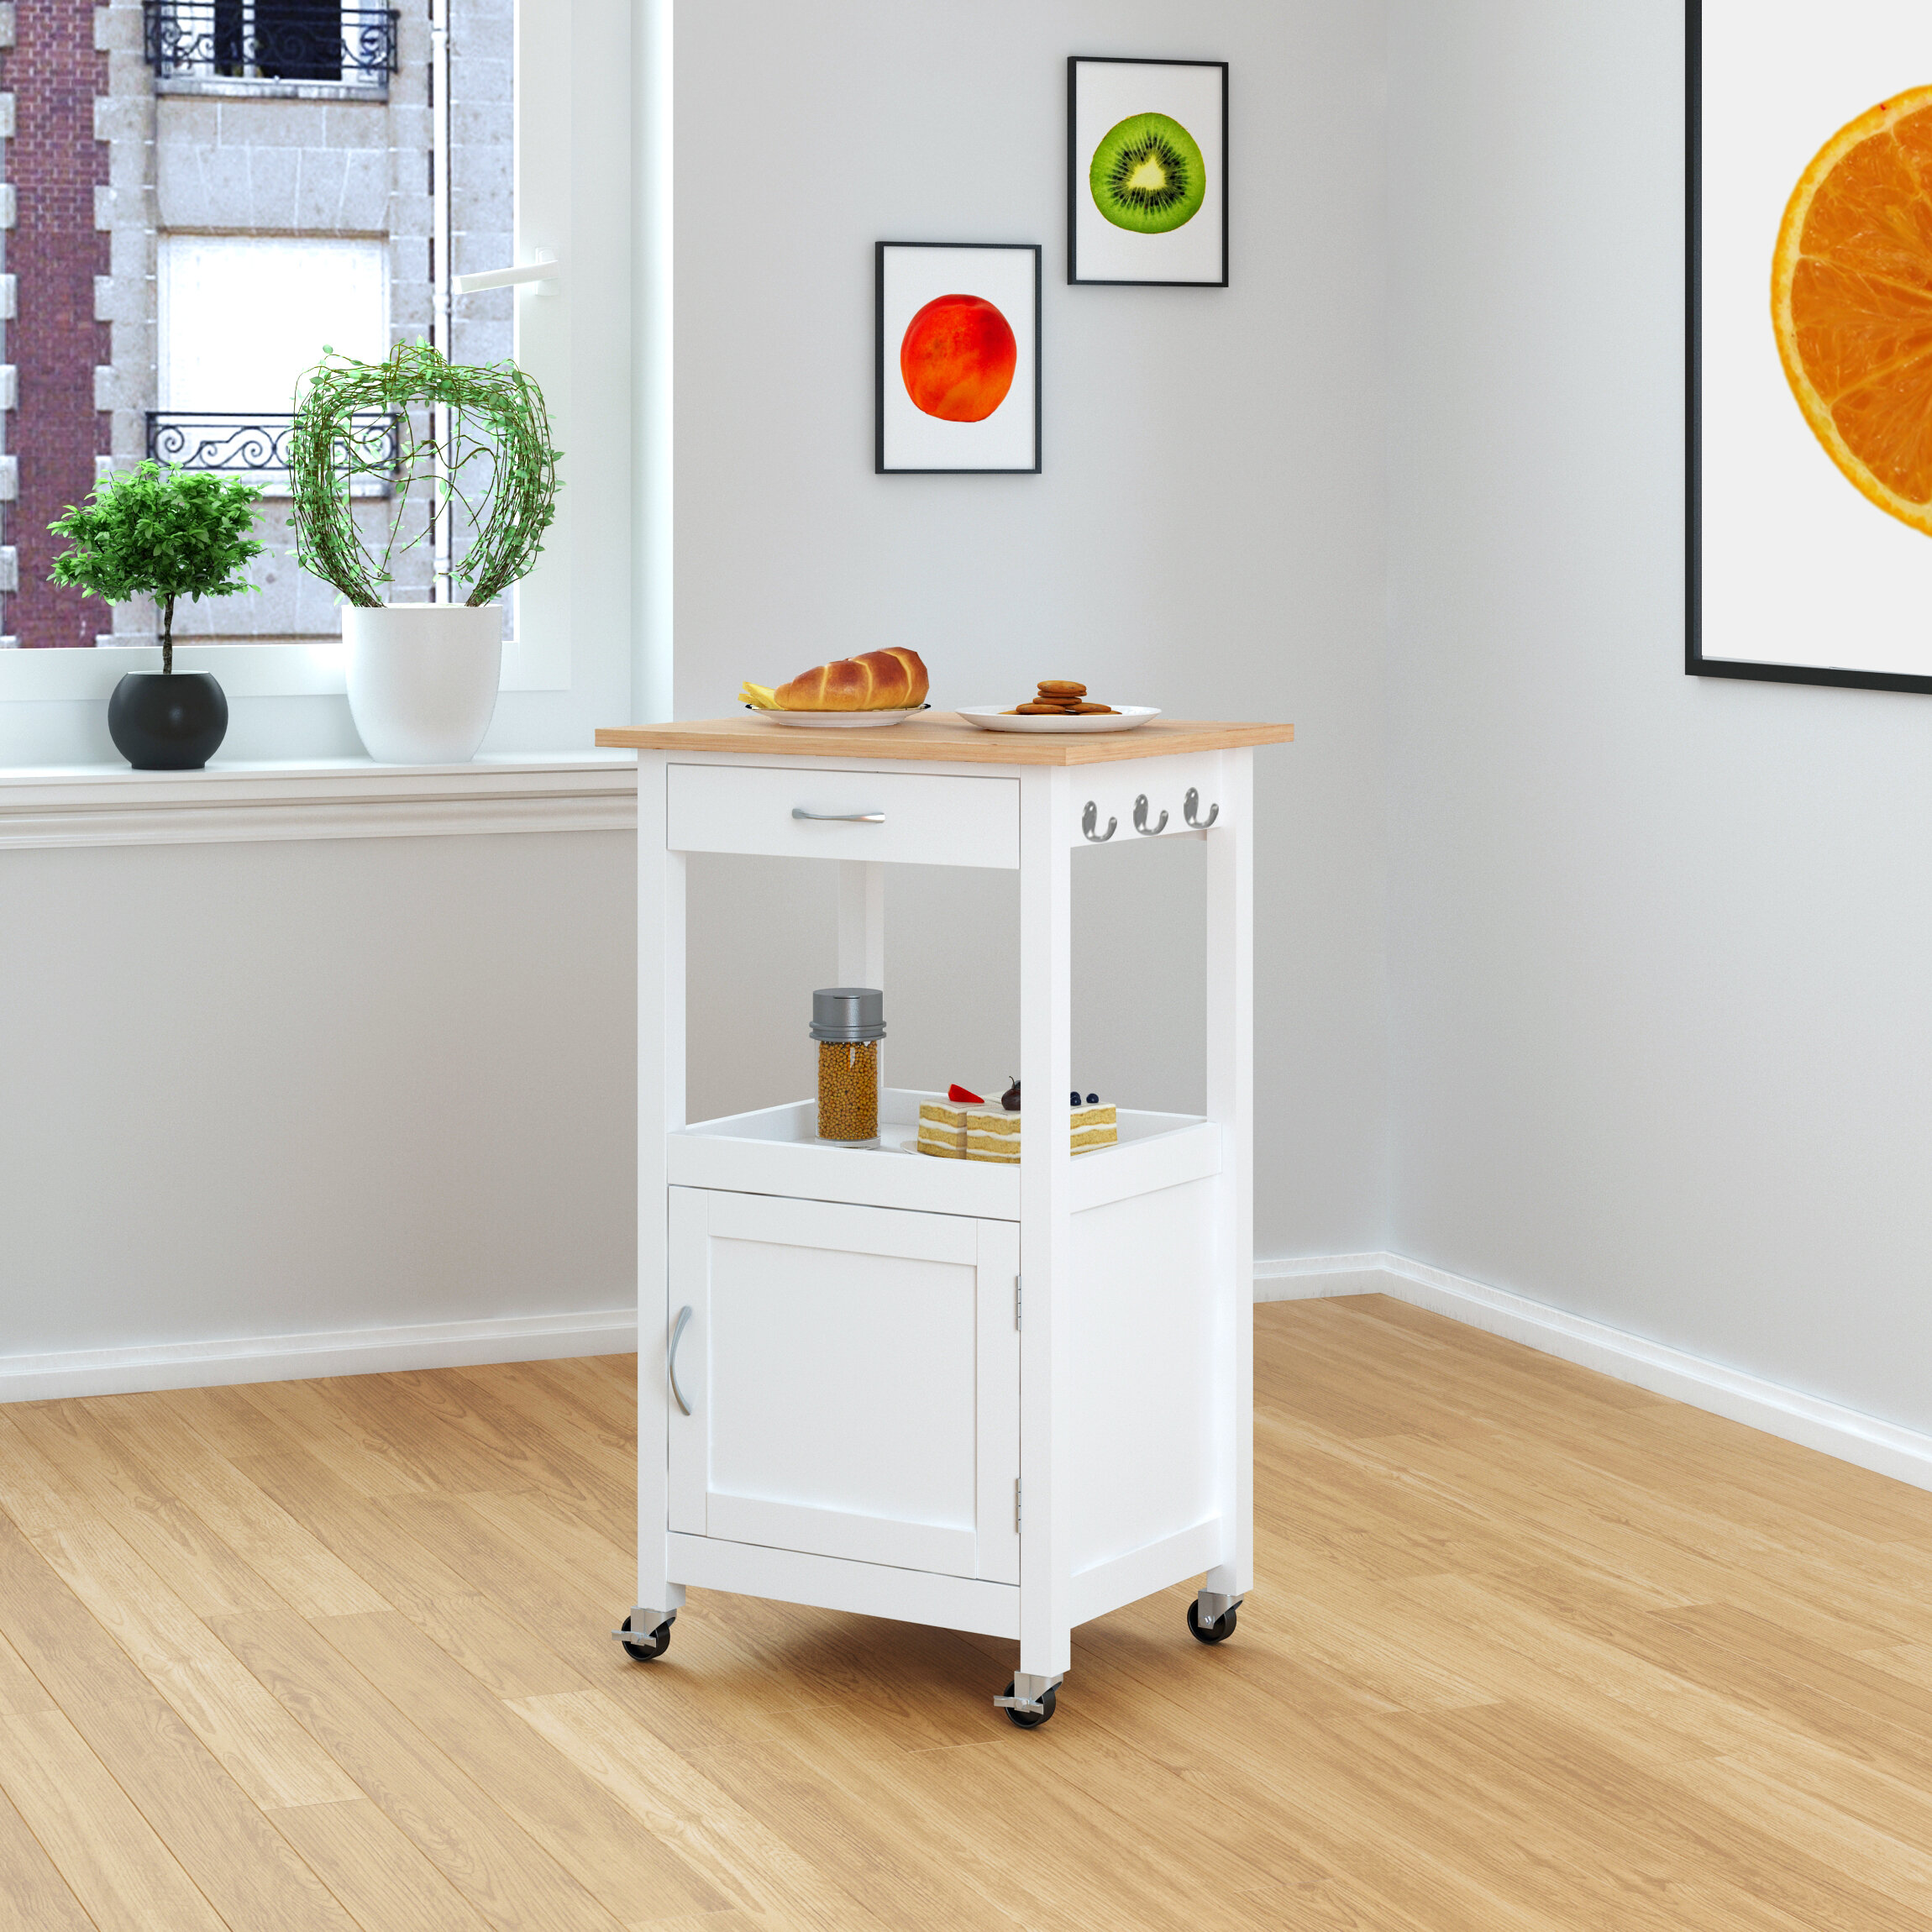 Stone Look Countertop Relaxdays Kitchen Cart with Tray and Drawer HxWxD: 85x60x40 cm Grey Bottle Rack Pine Wood 